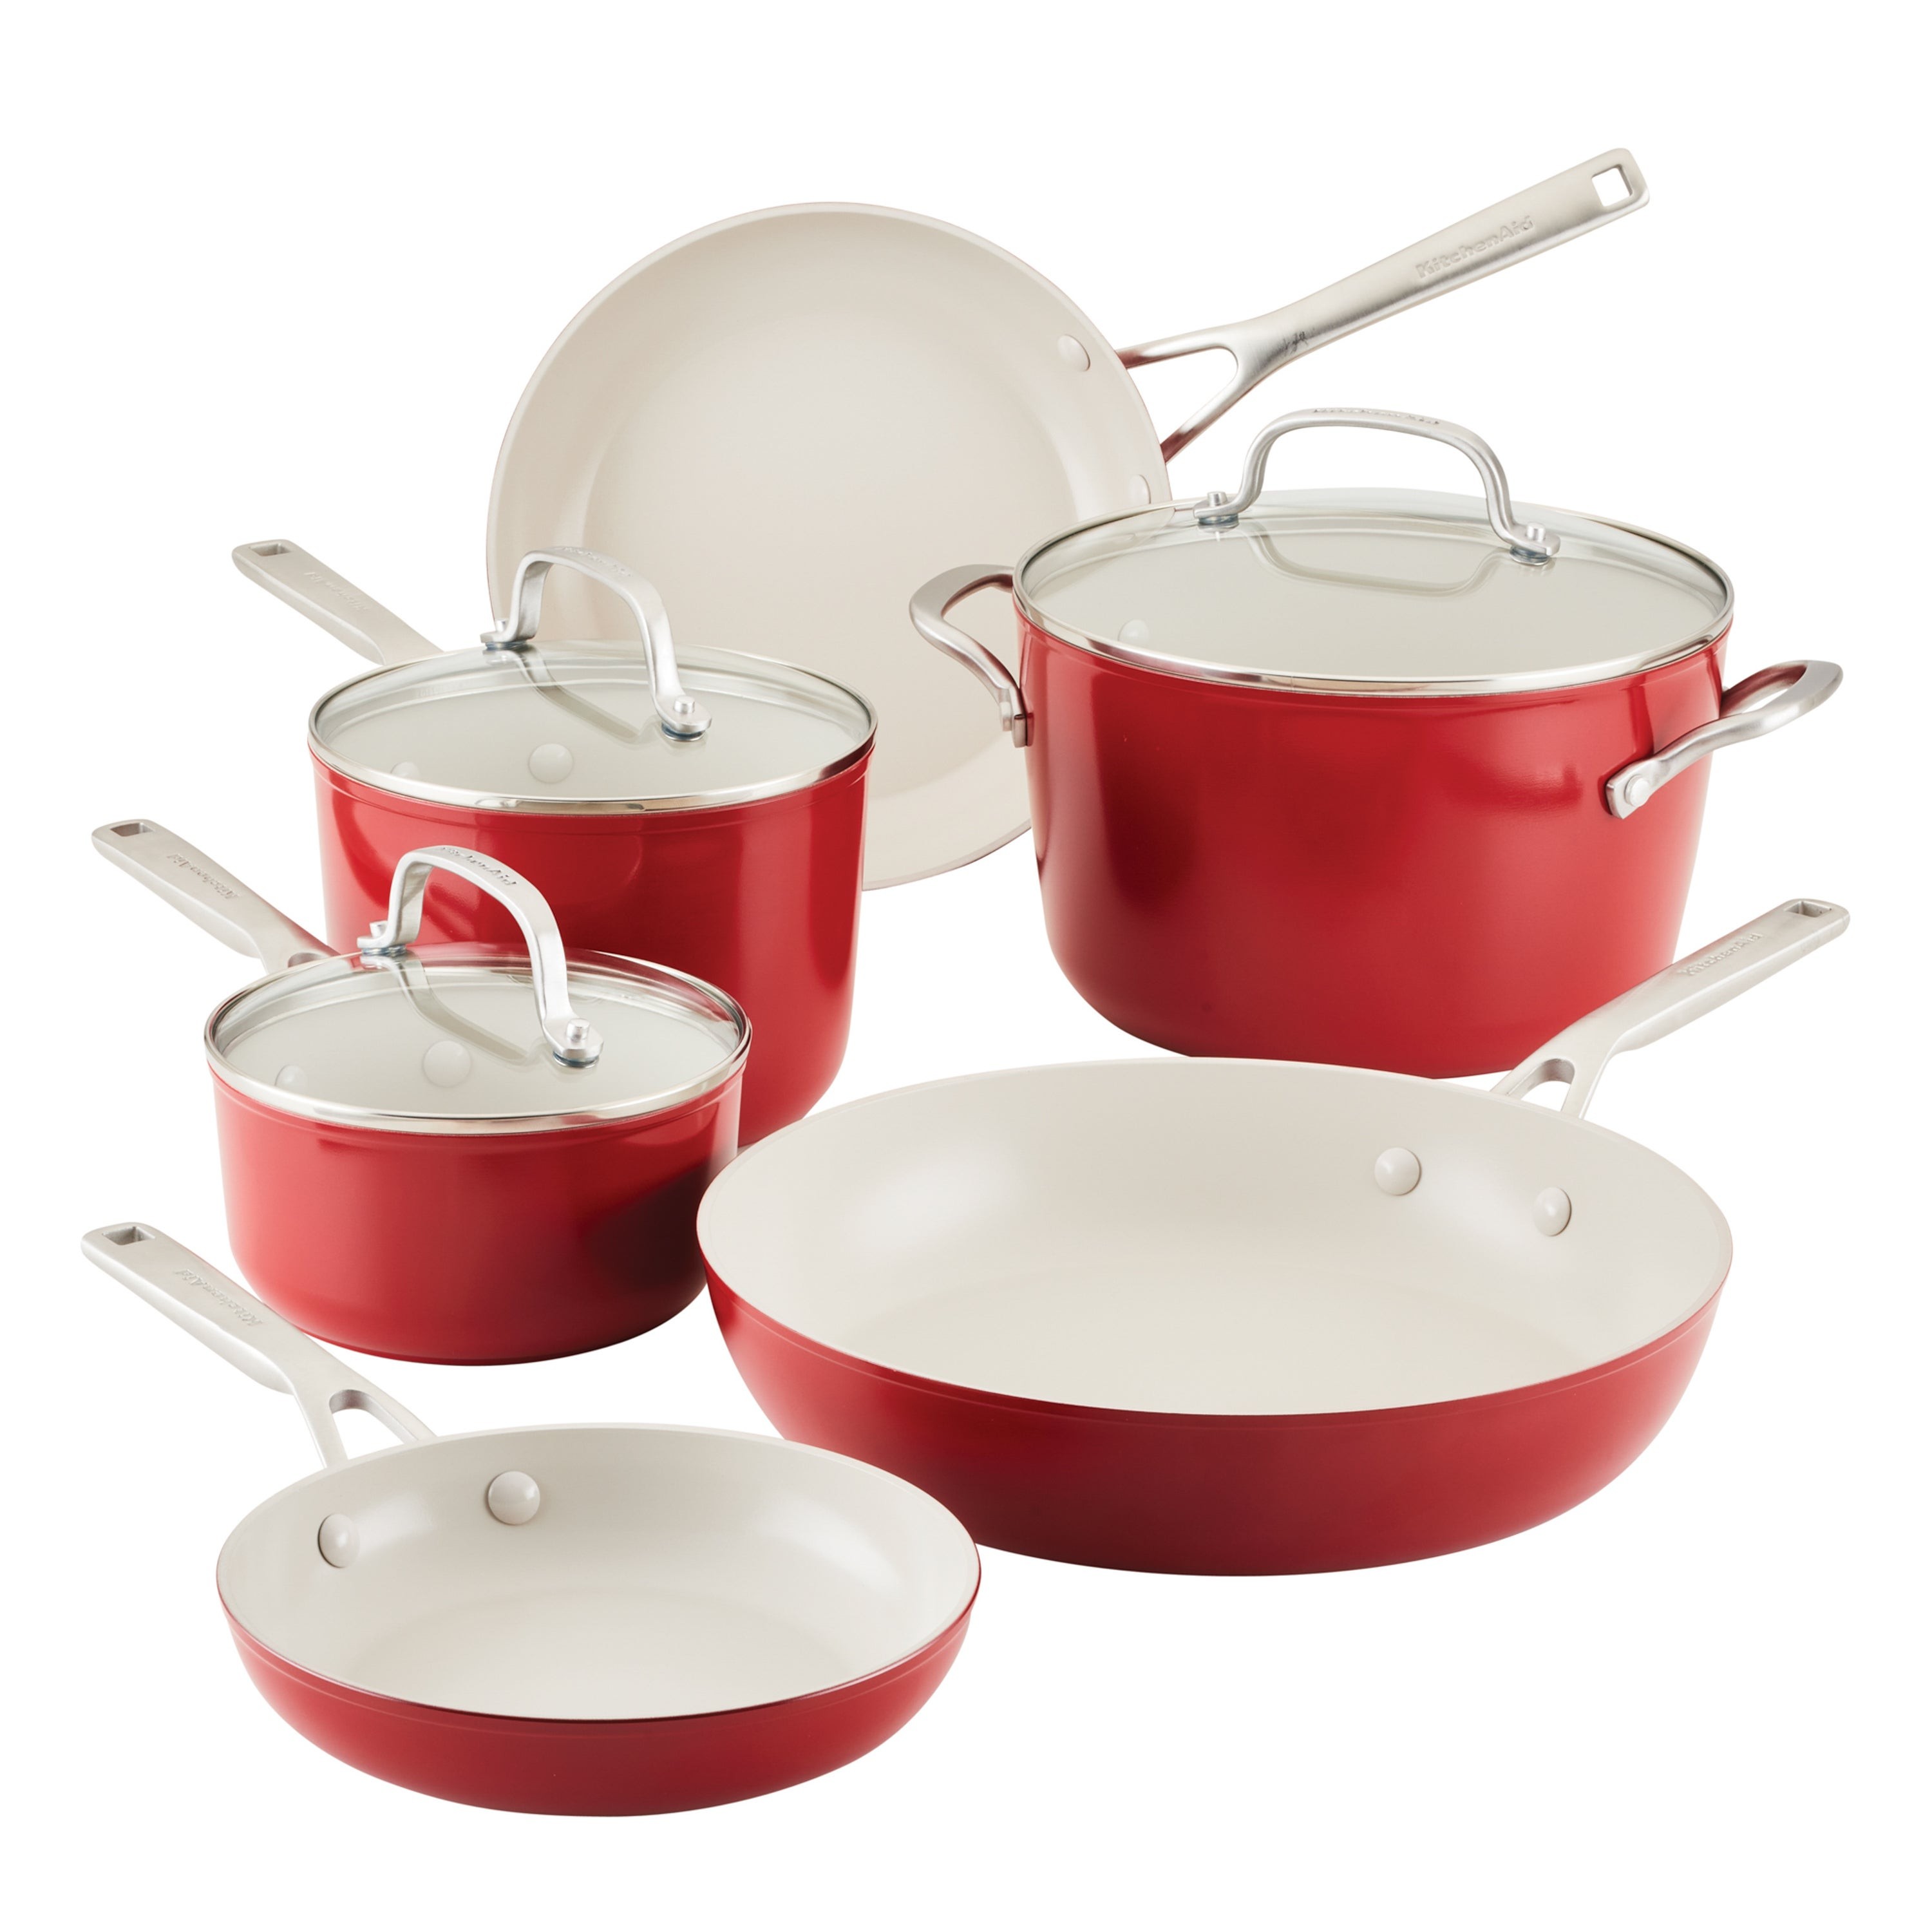 9pc Hard Anodized Ceramic Nonstick Cookware Set Empire Red